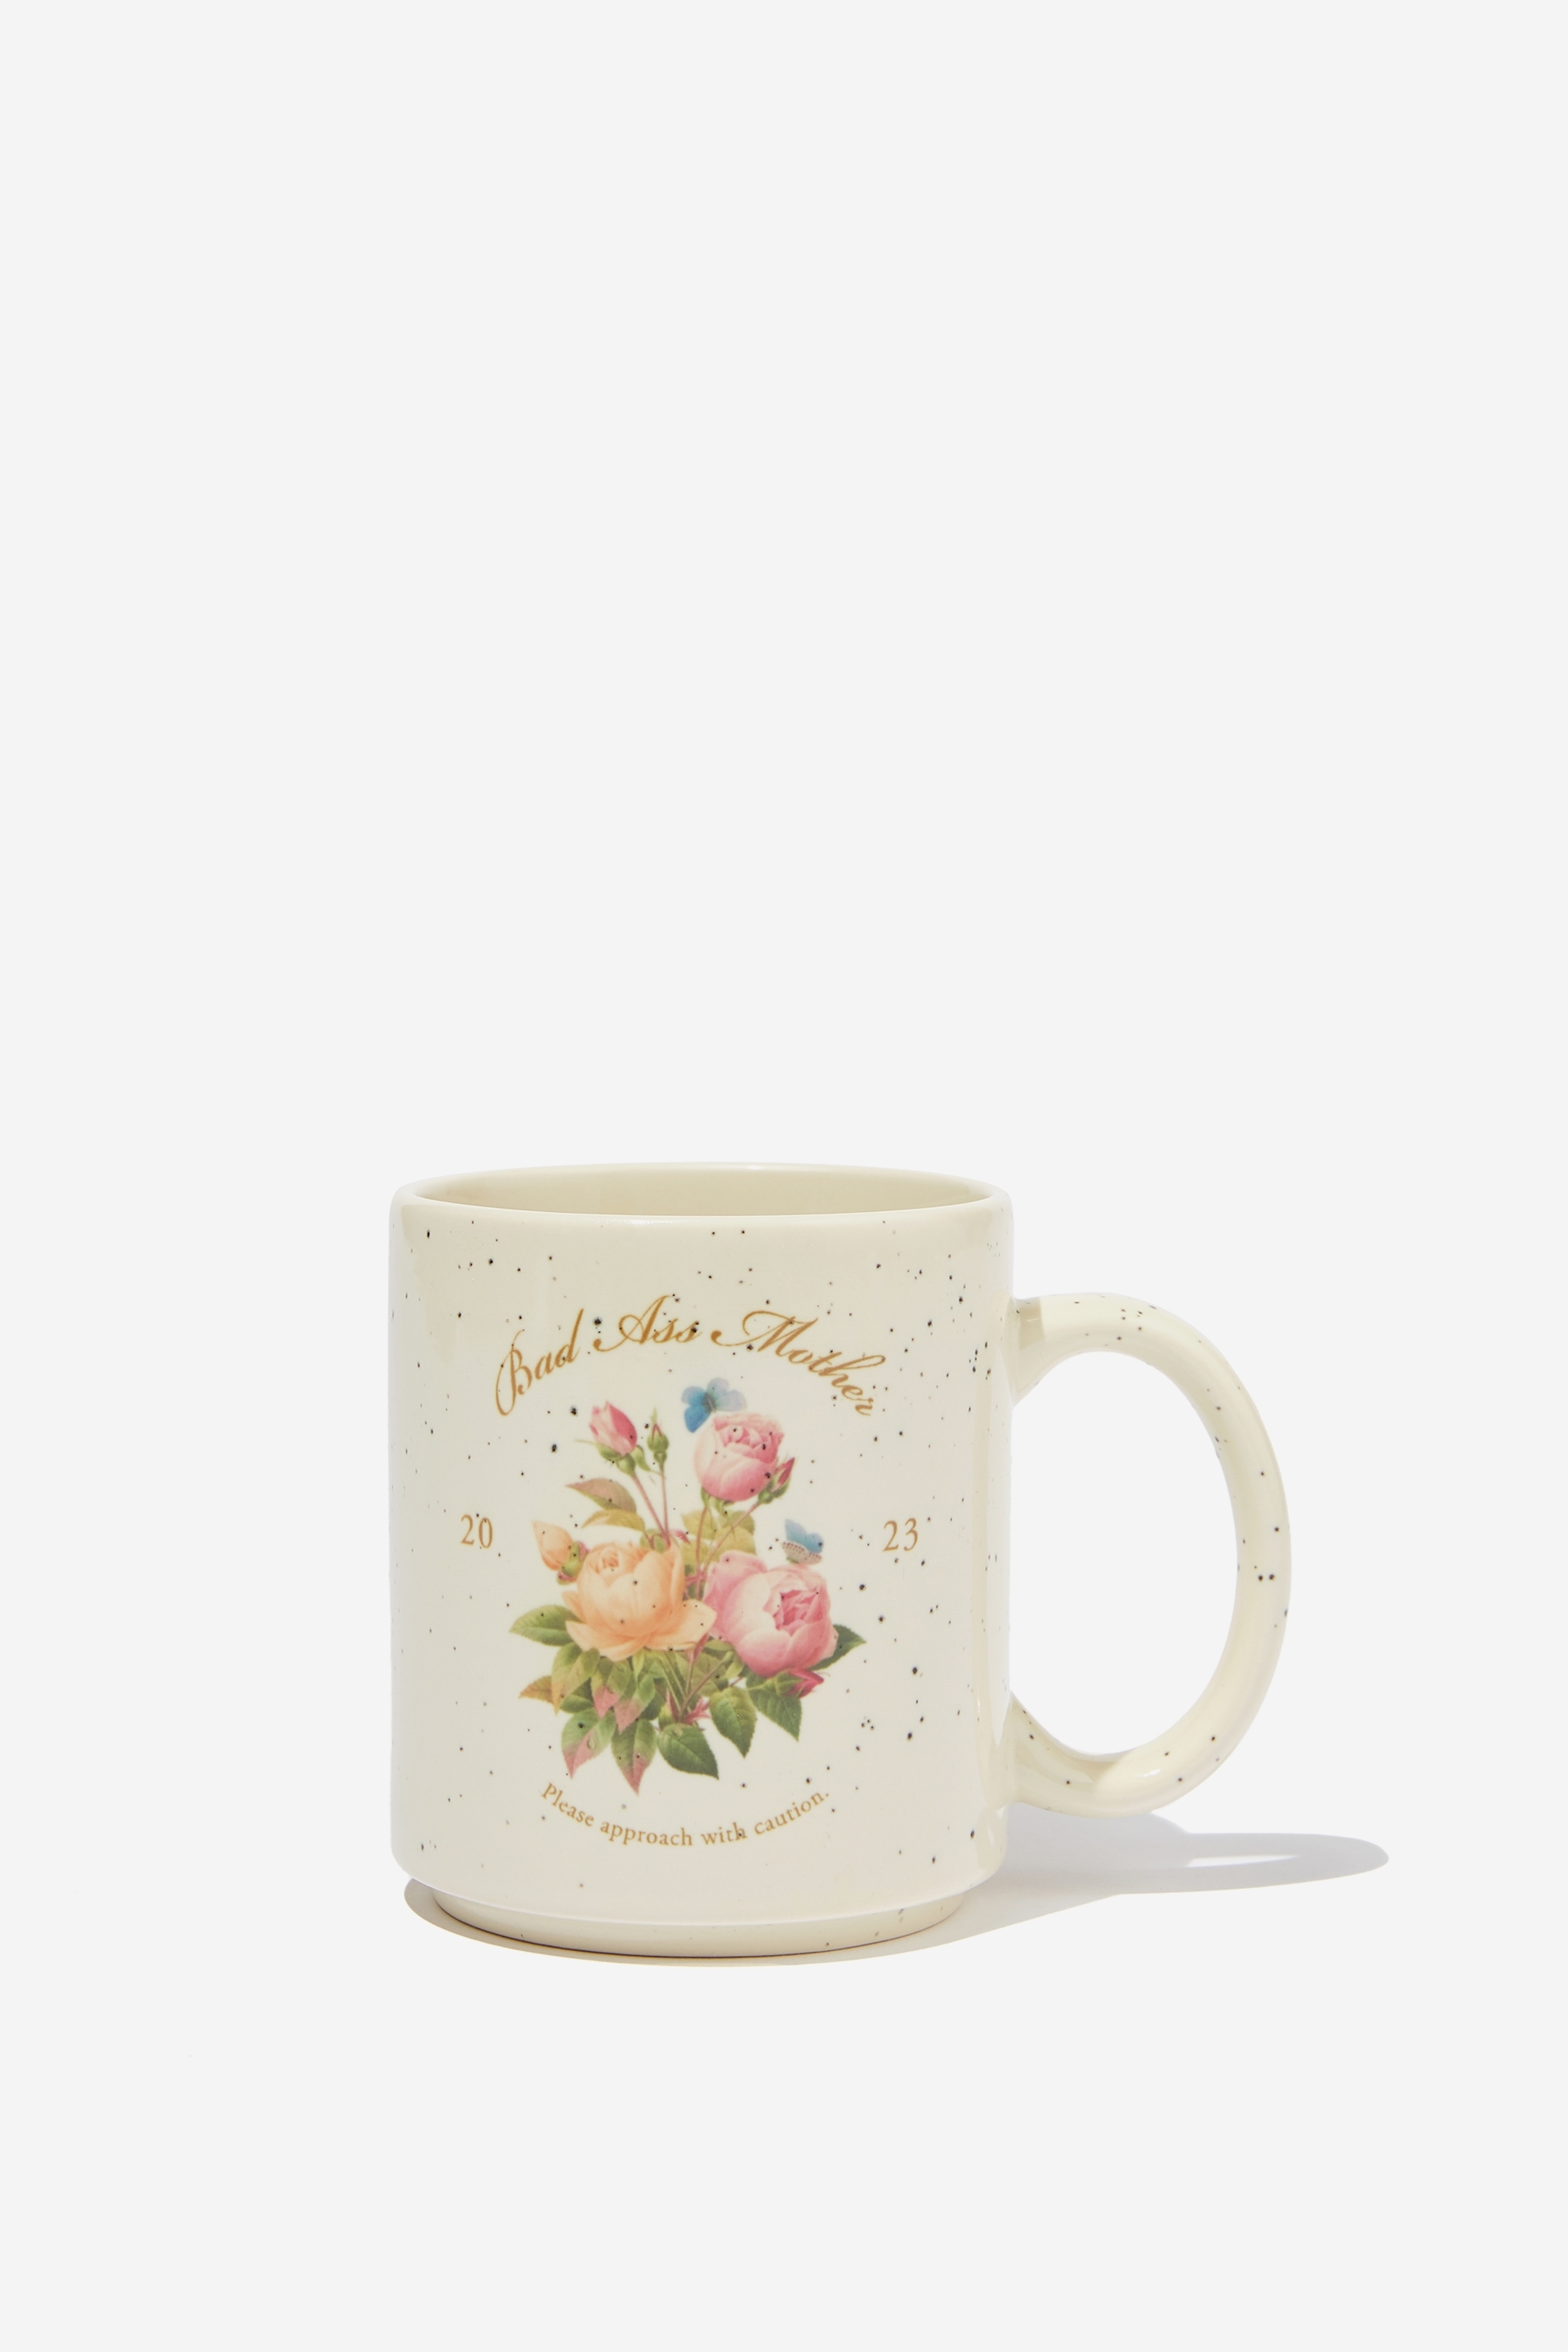 Typo - Limited Edition Mothers Day Mug - Bad ass mother speckle